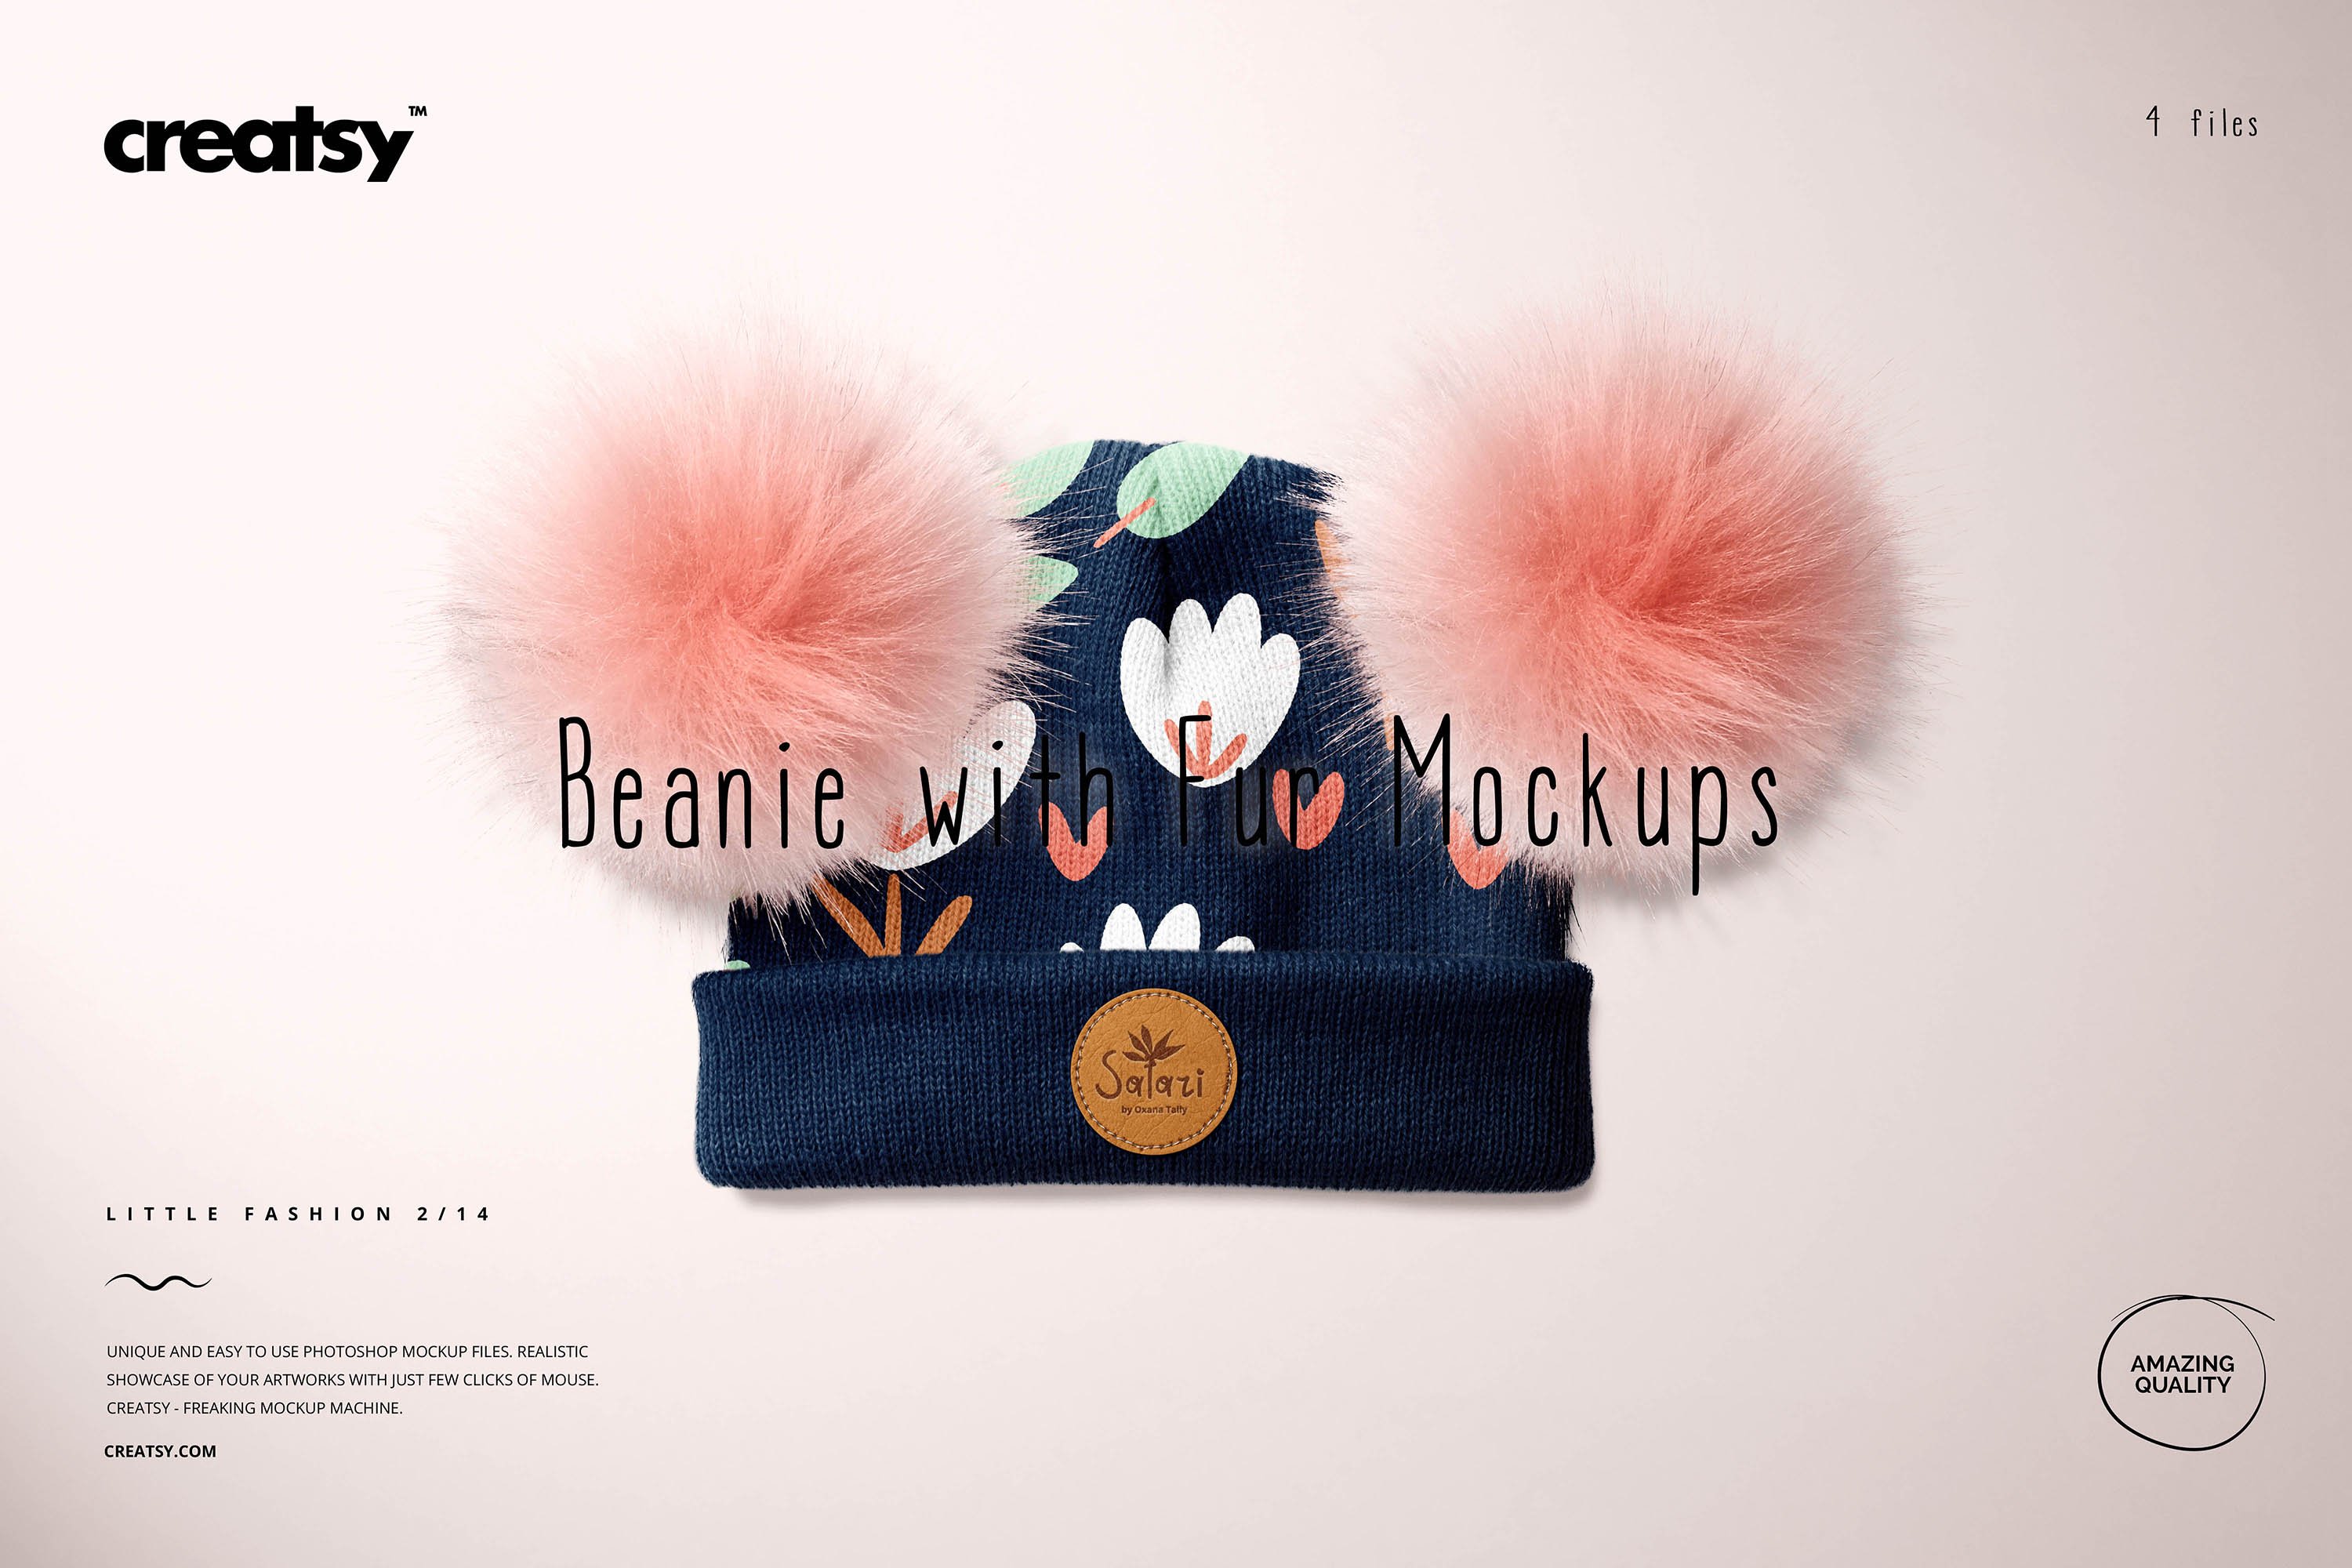 Beanie with Fur Pompons Mockup Set cover image.